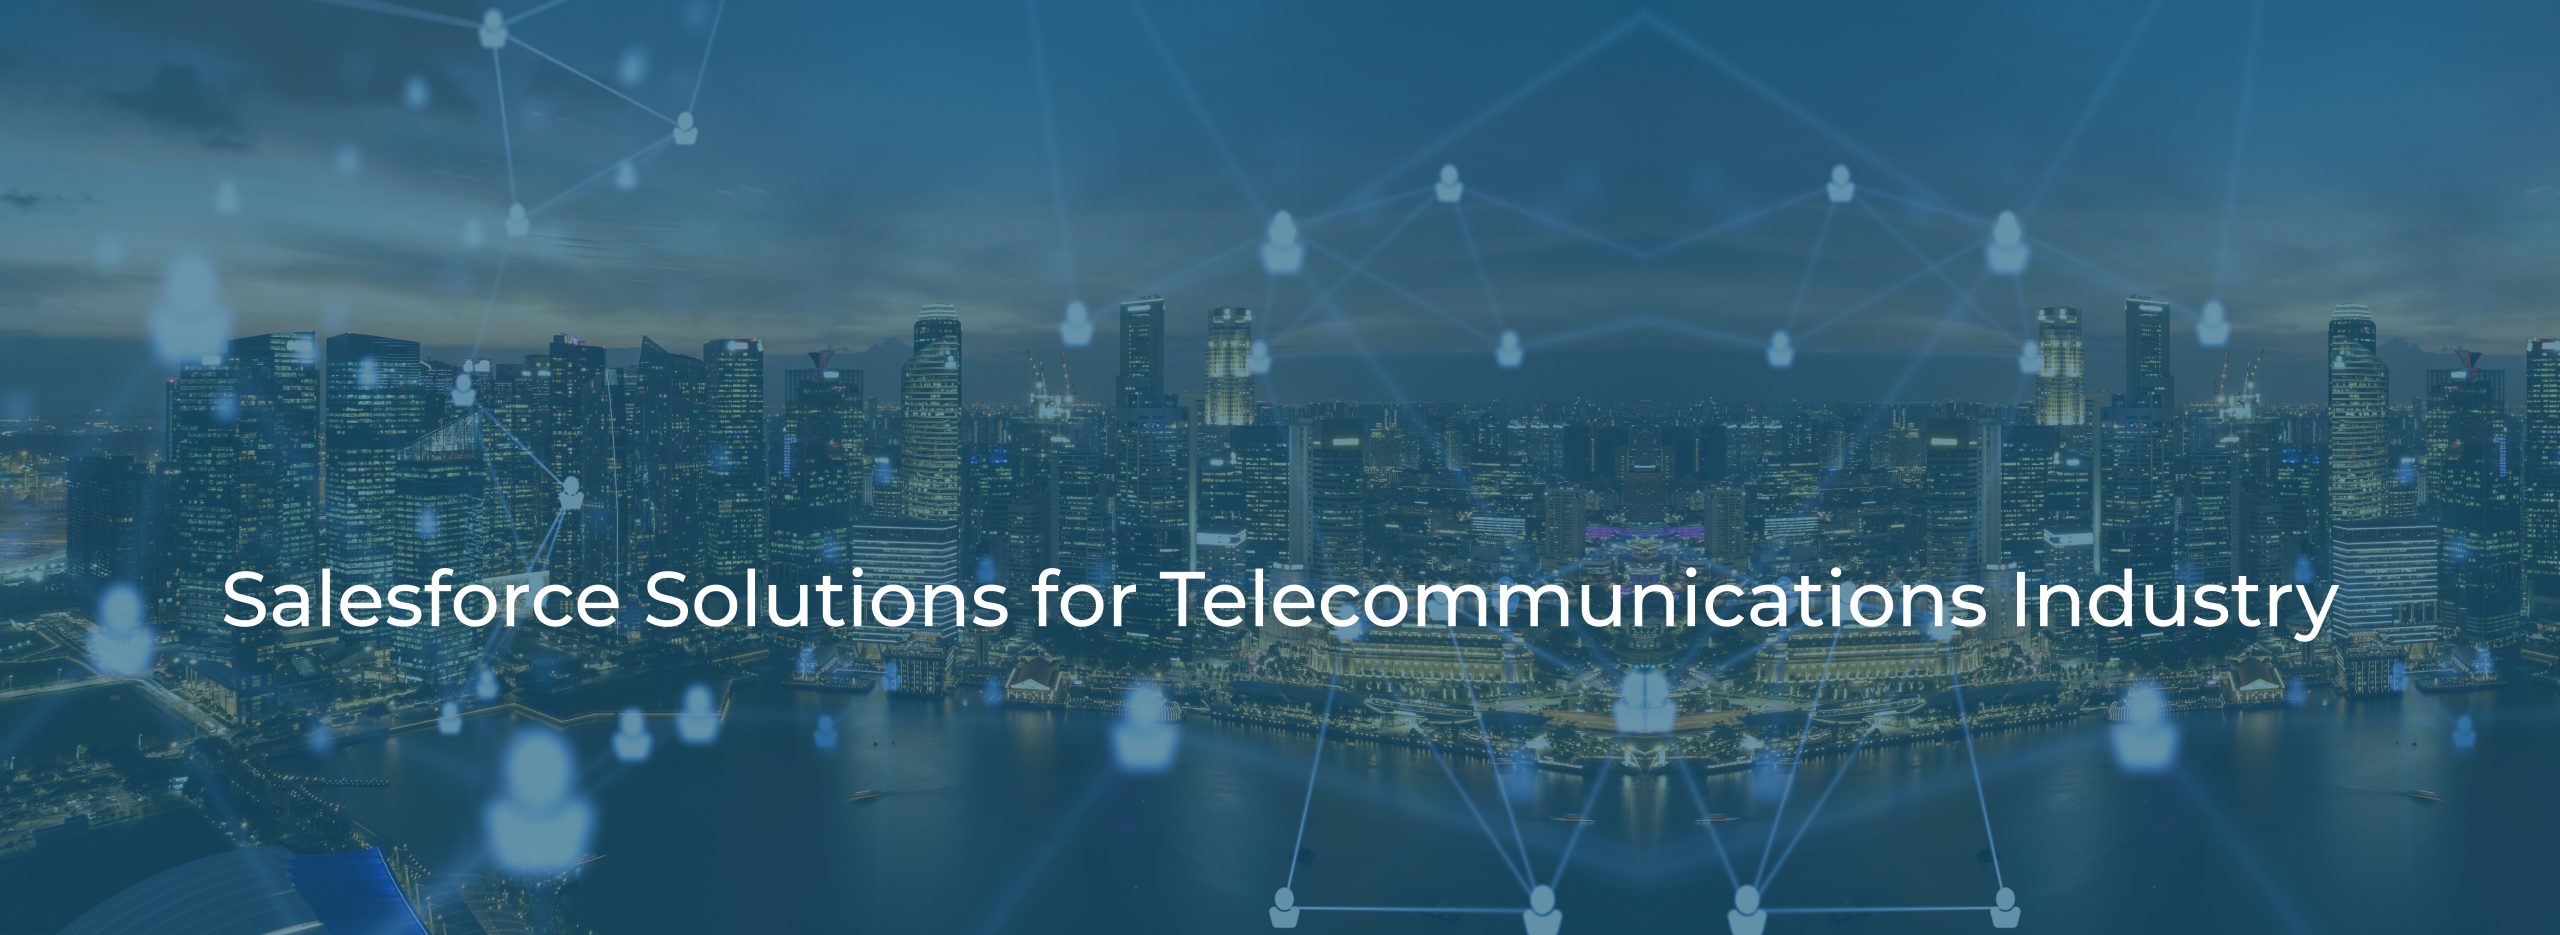 Salesforce Solutions for Telecommunications Industry